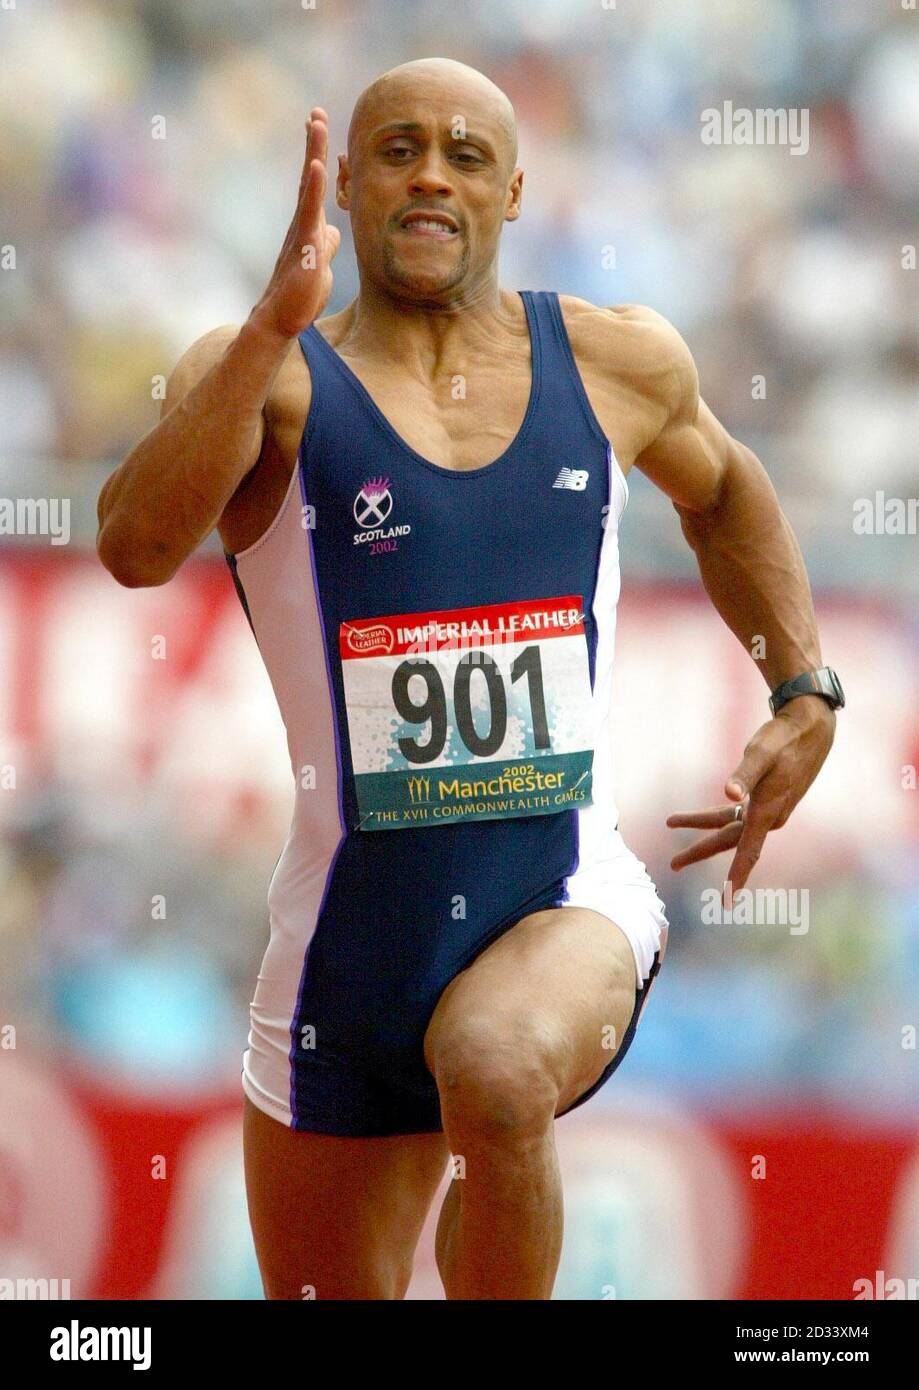 Scotland's Jamie Quarry in action during the Men's 100 m Decathlon event of the 2002 Commonwealth Games at the City of Manchester Stadium, Manchester. Stock Photo